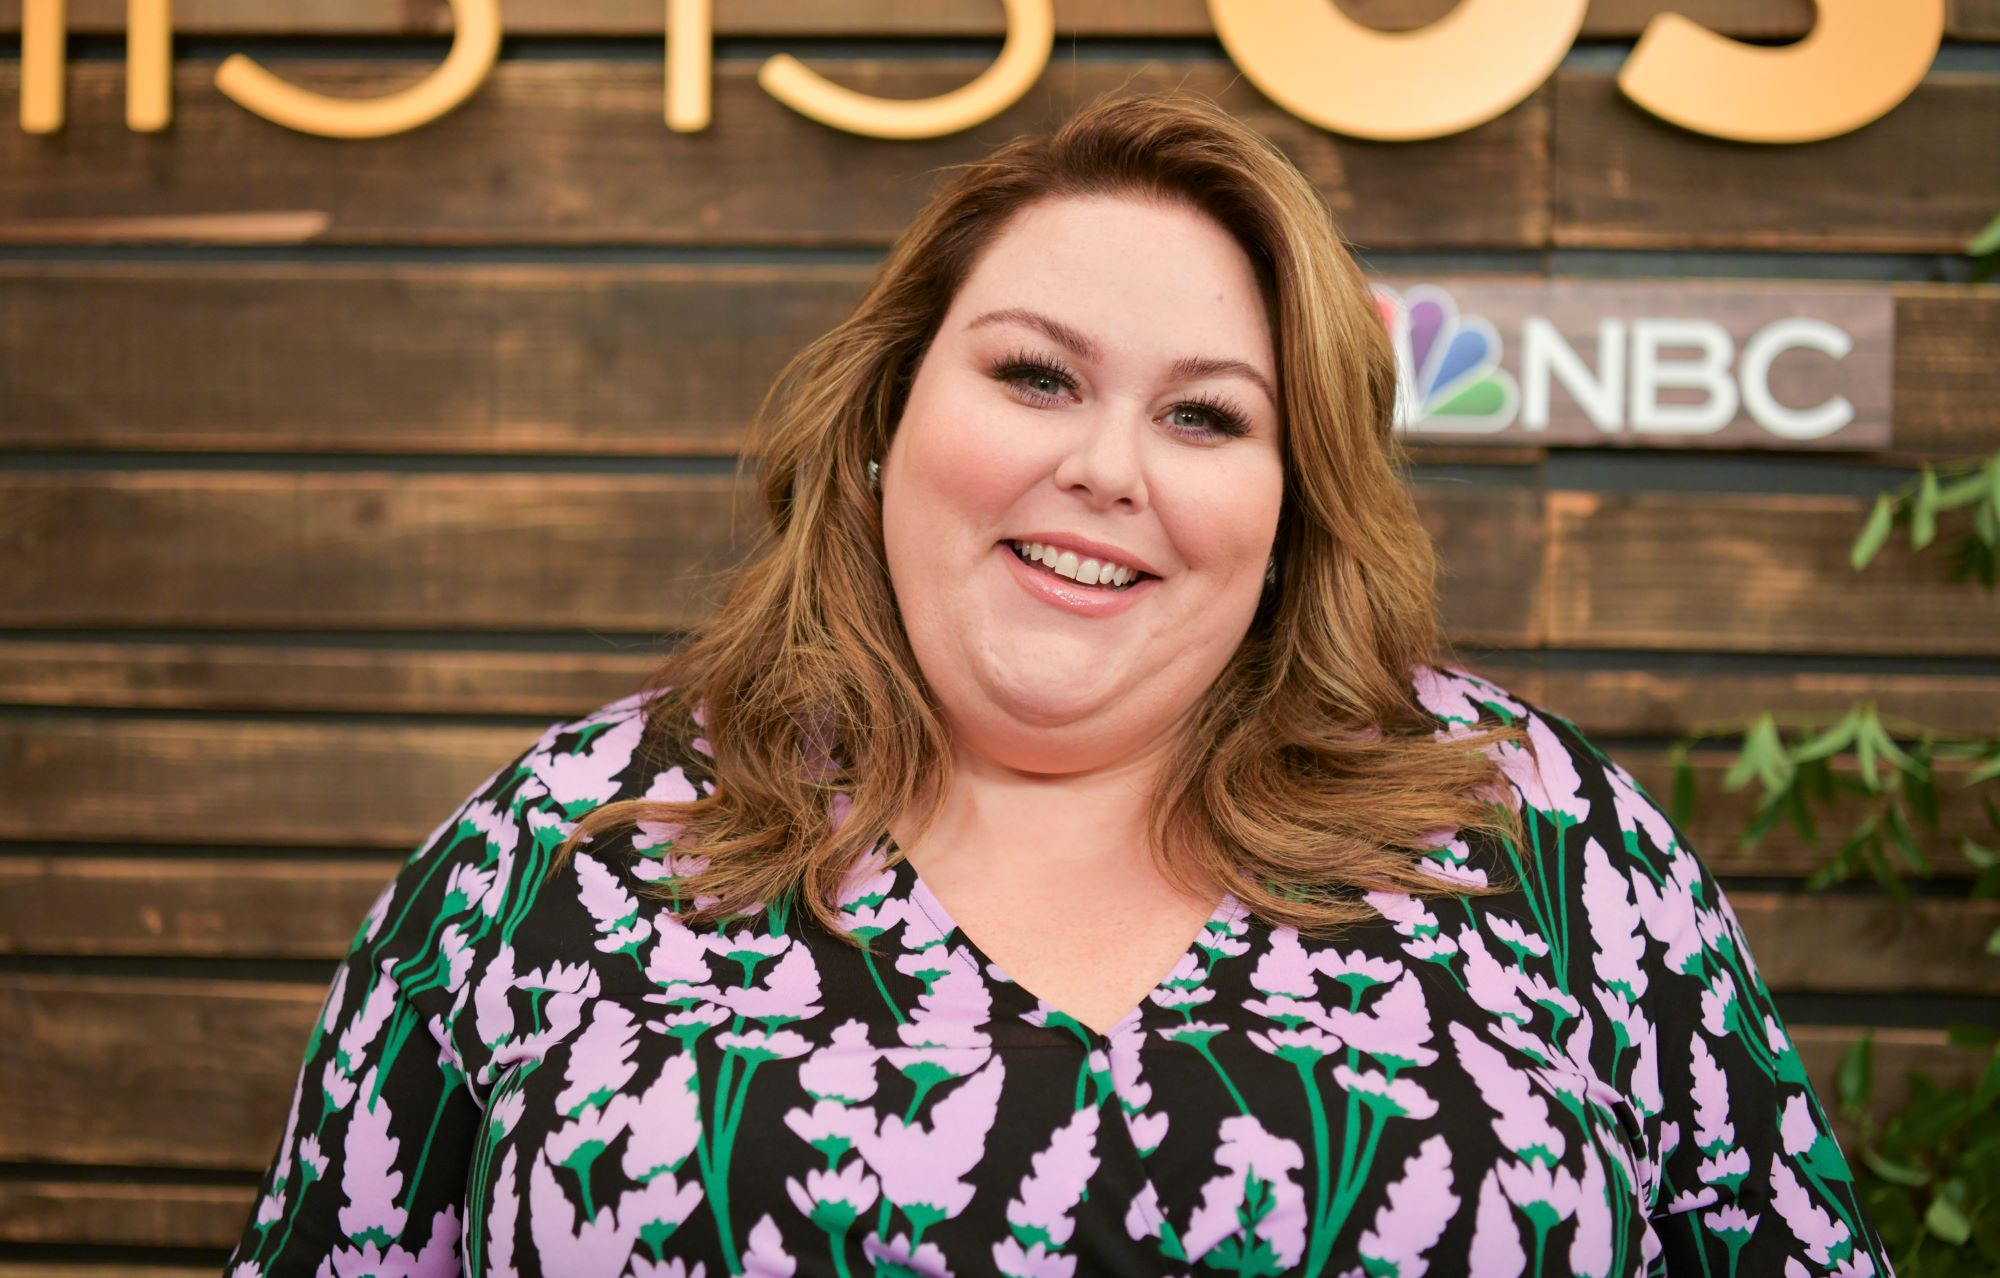 Chrissy Metz, who starred as Kate Pearson in 'This Is Us' on NBC, wears a black dress with light pink flowers and green stems on it.